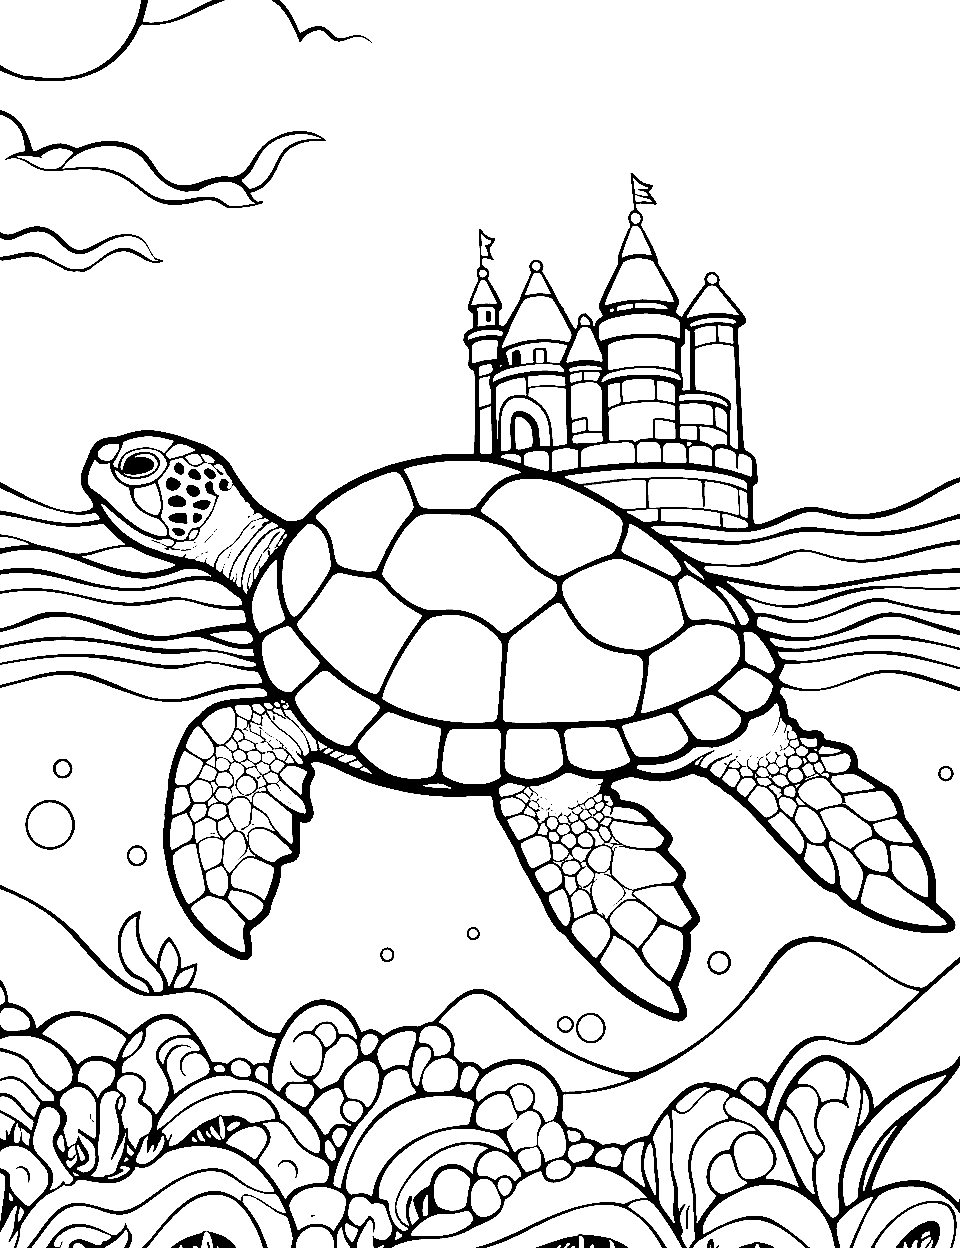 Turtle and Castle Coloring Page - A turtle poking out of the water and looking at a castle at a distance.